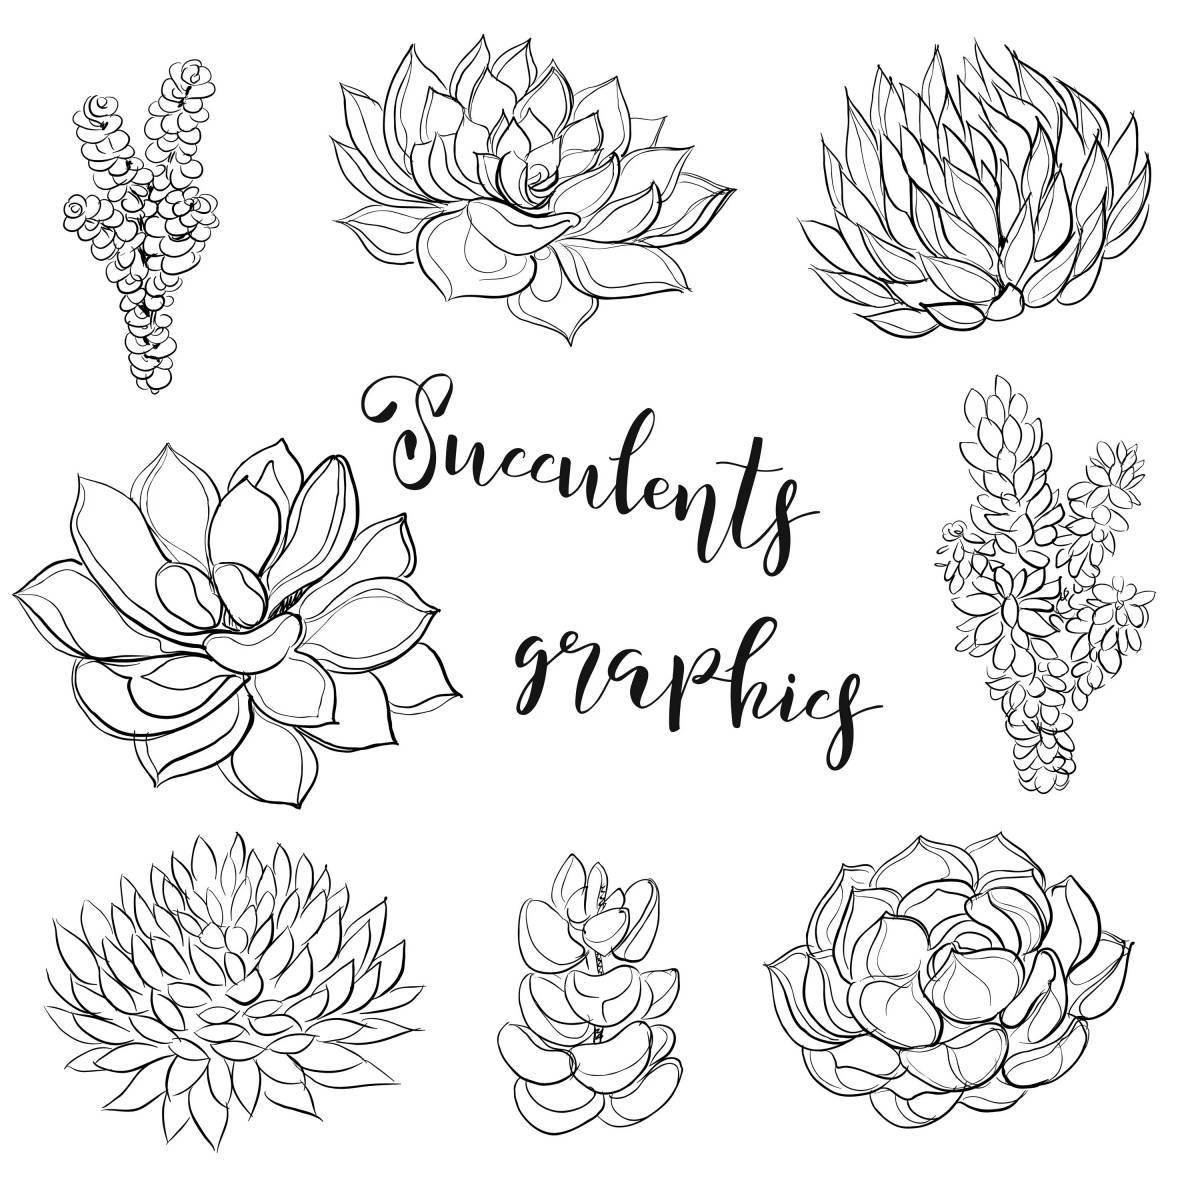 Great coloring succulents